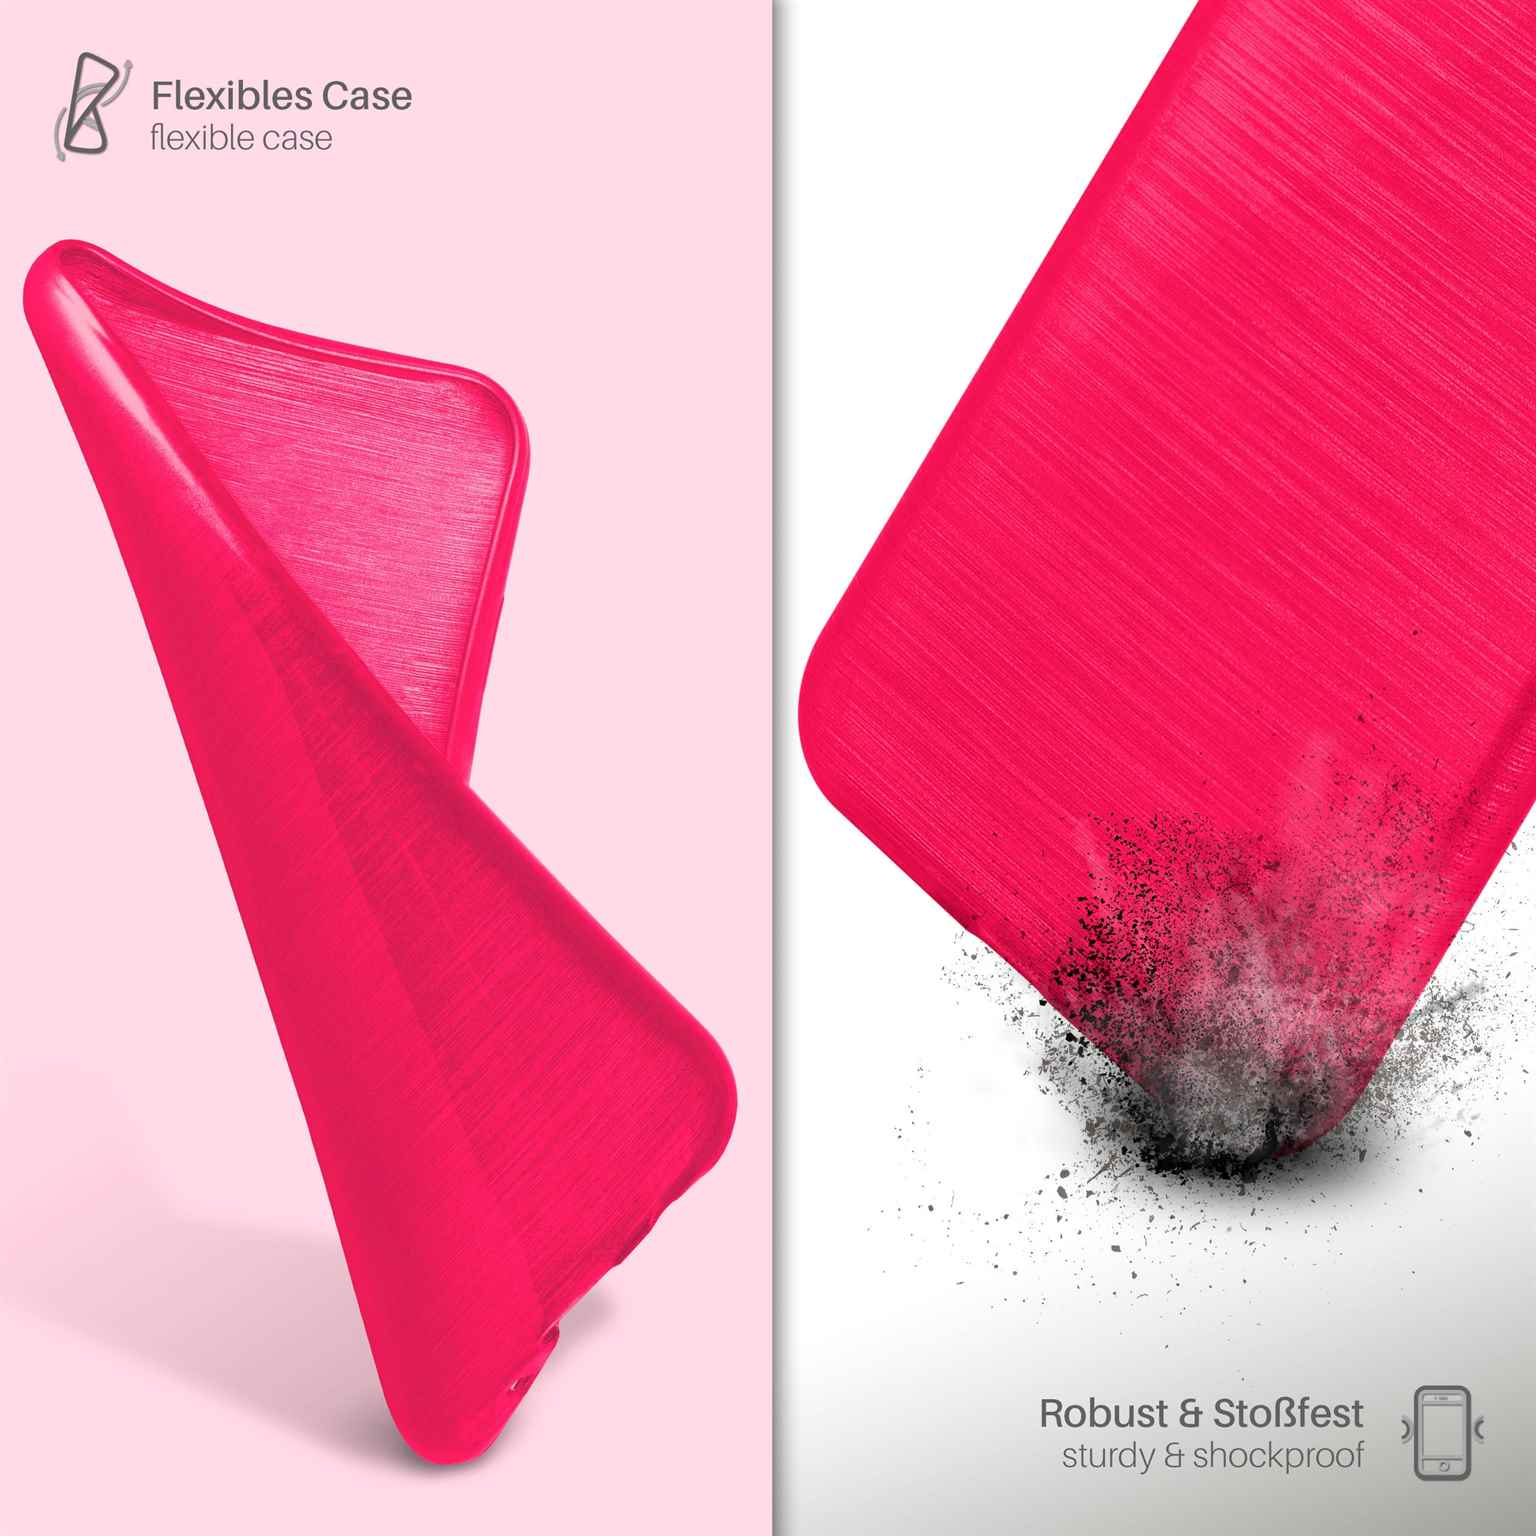 MOEX Brushed Case, Backcover, HTC, One M7, Magenta-Pink